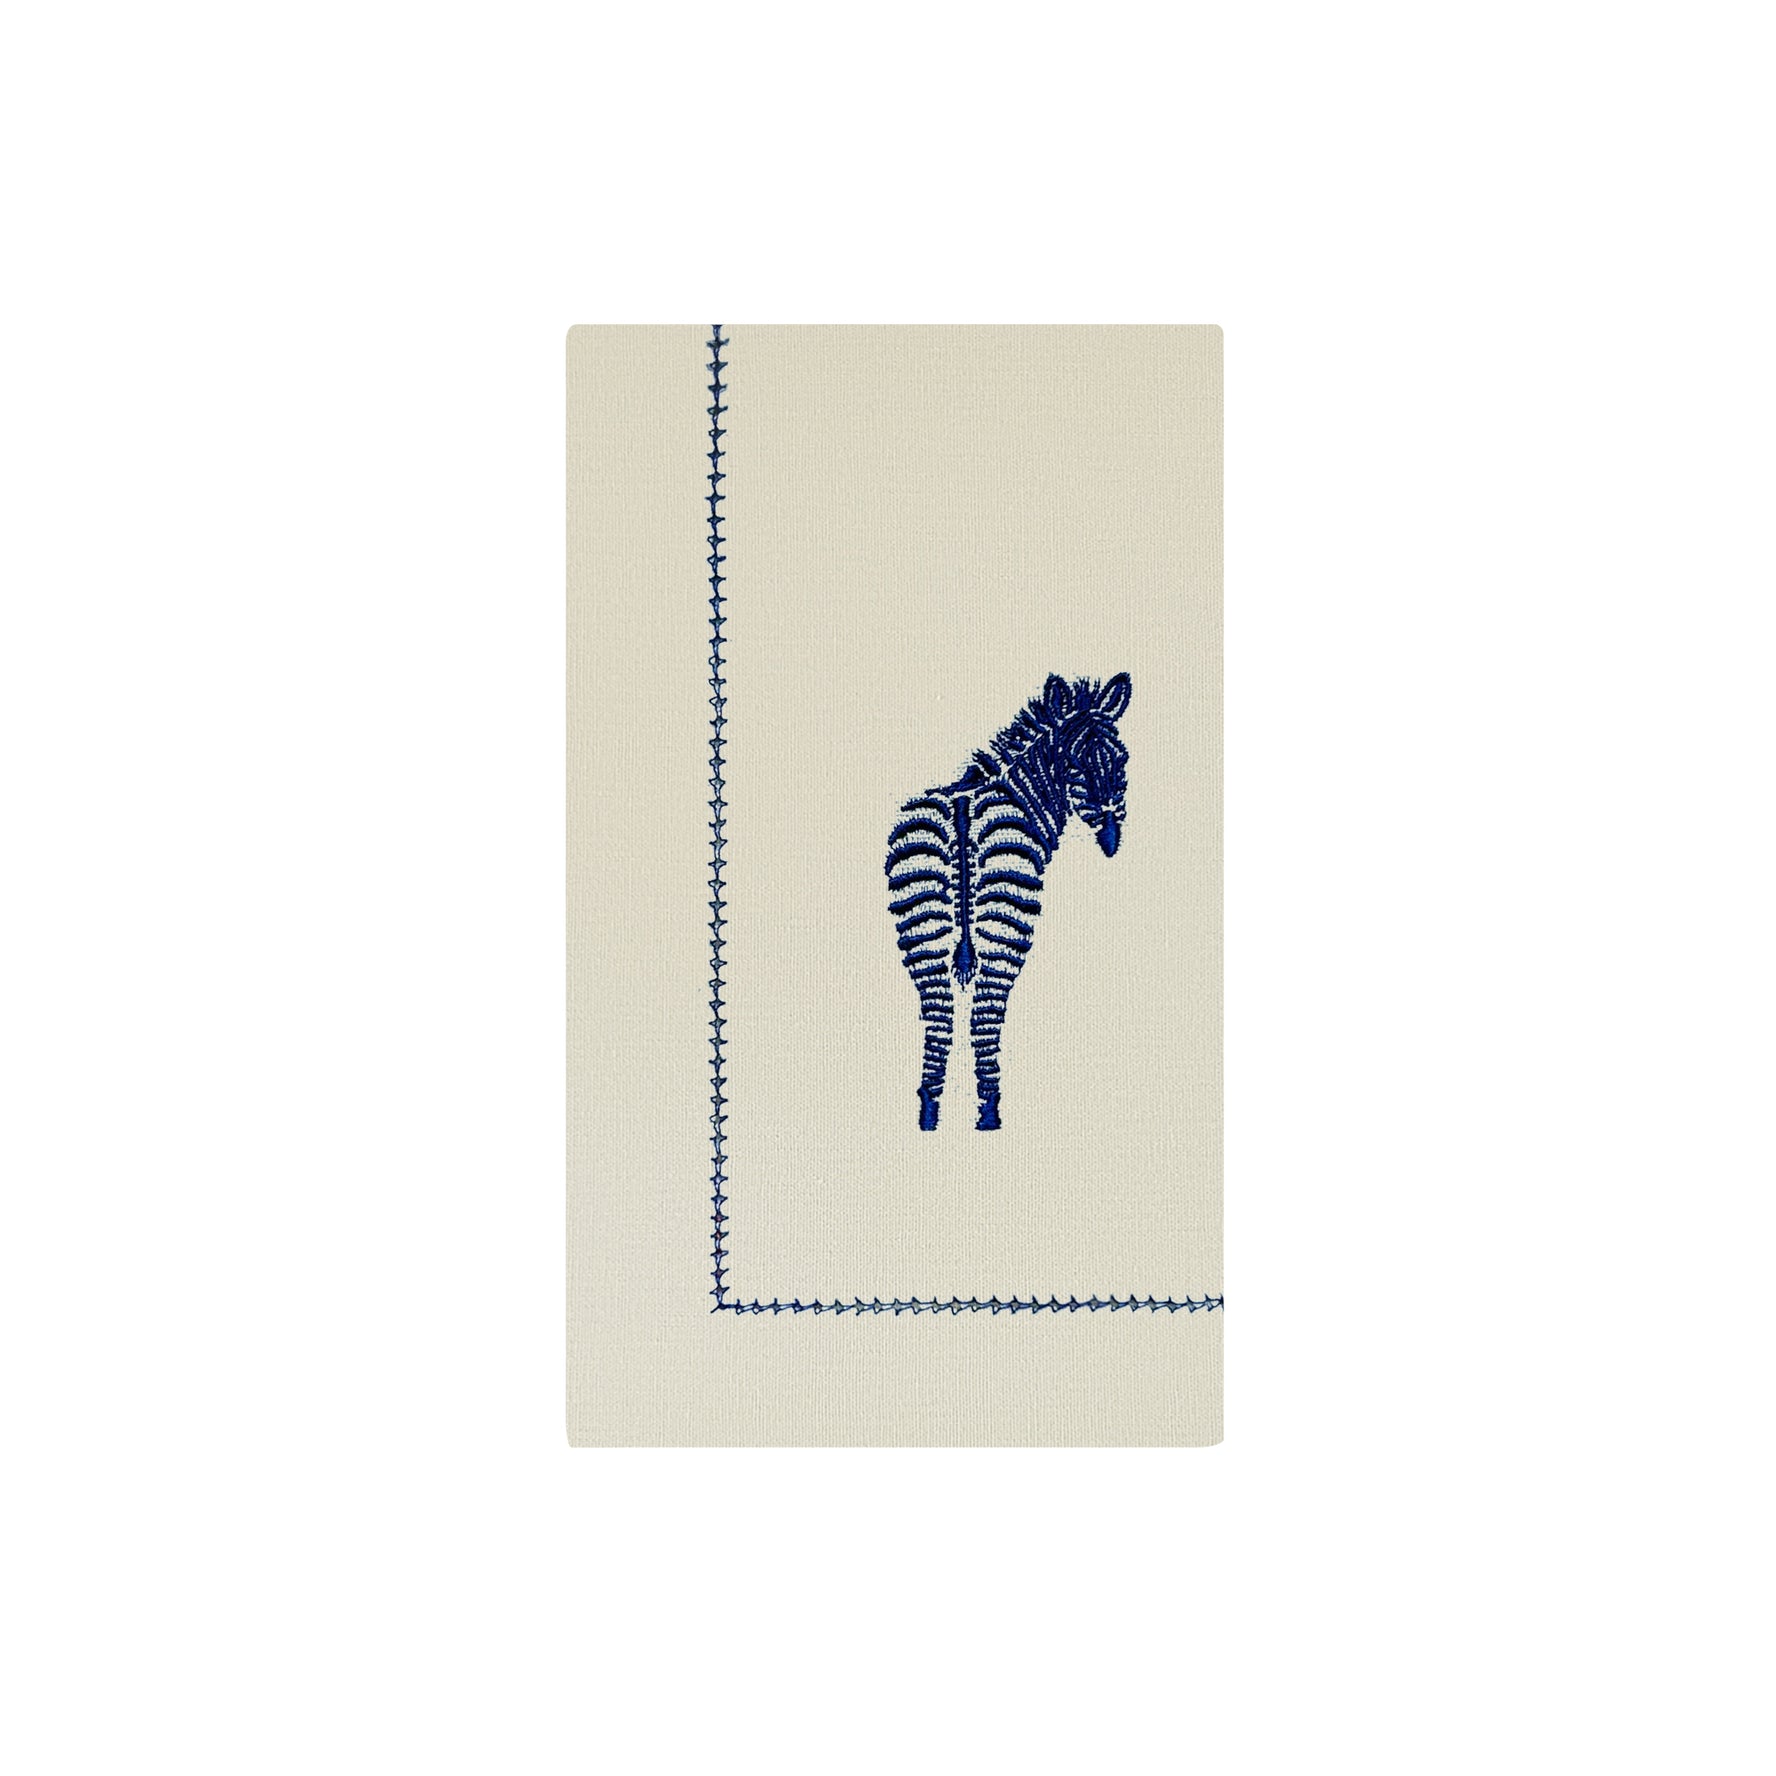 Embroidered Zebra Placemats | Set of 4